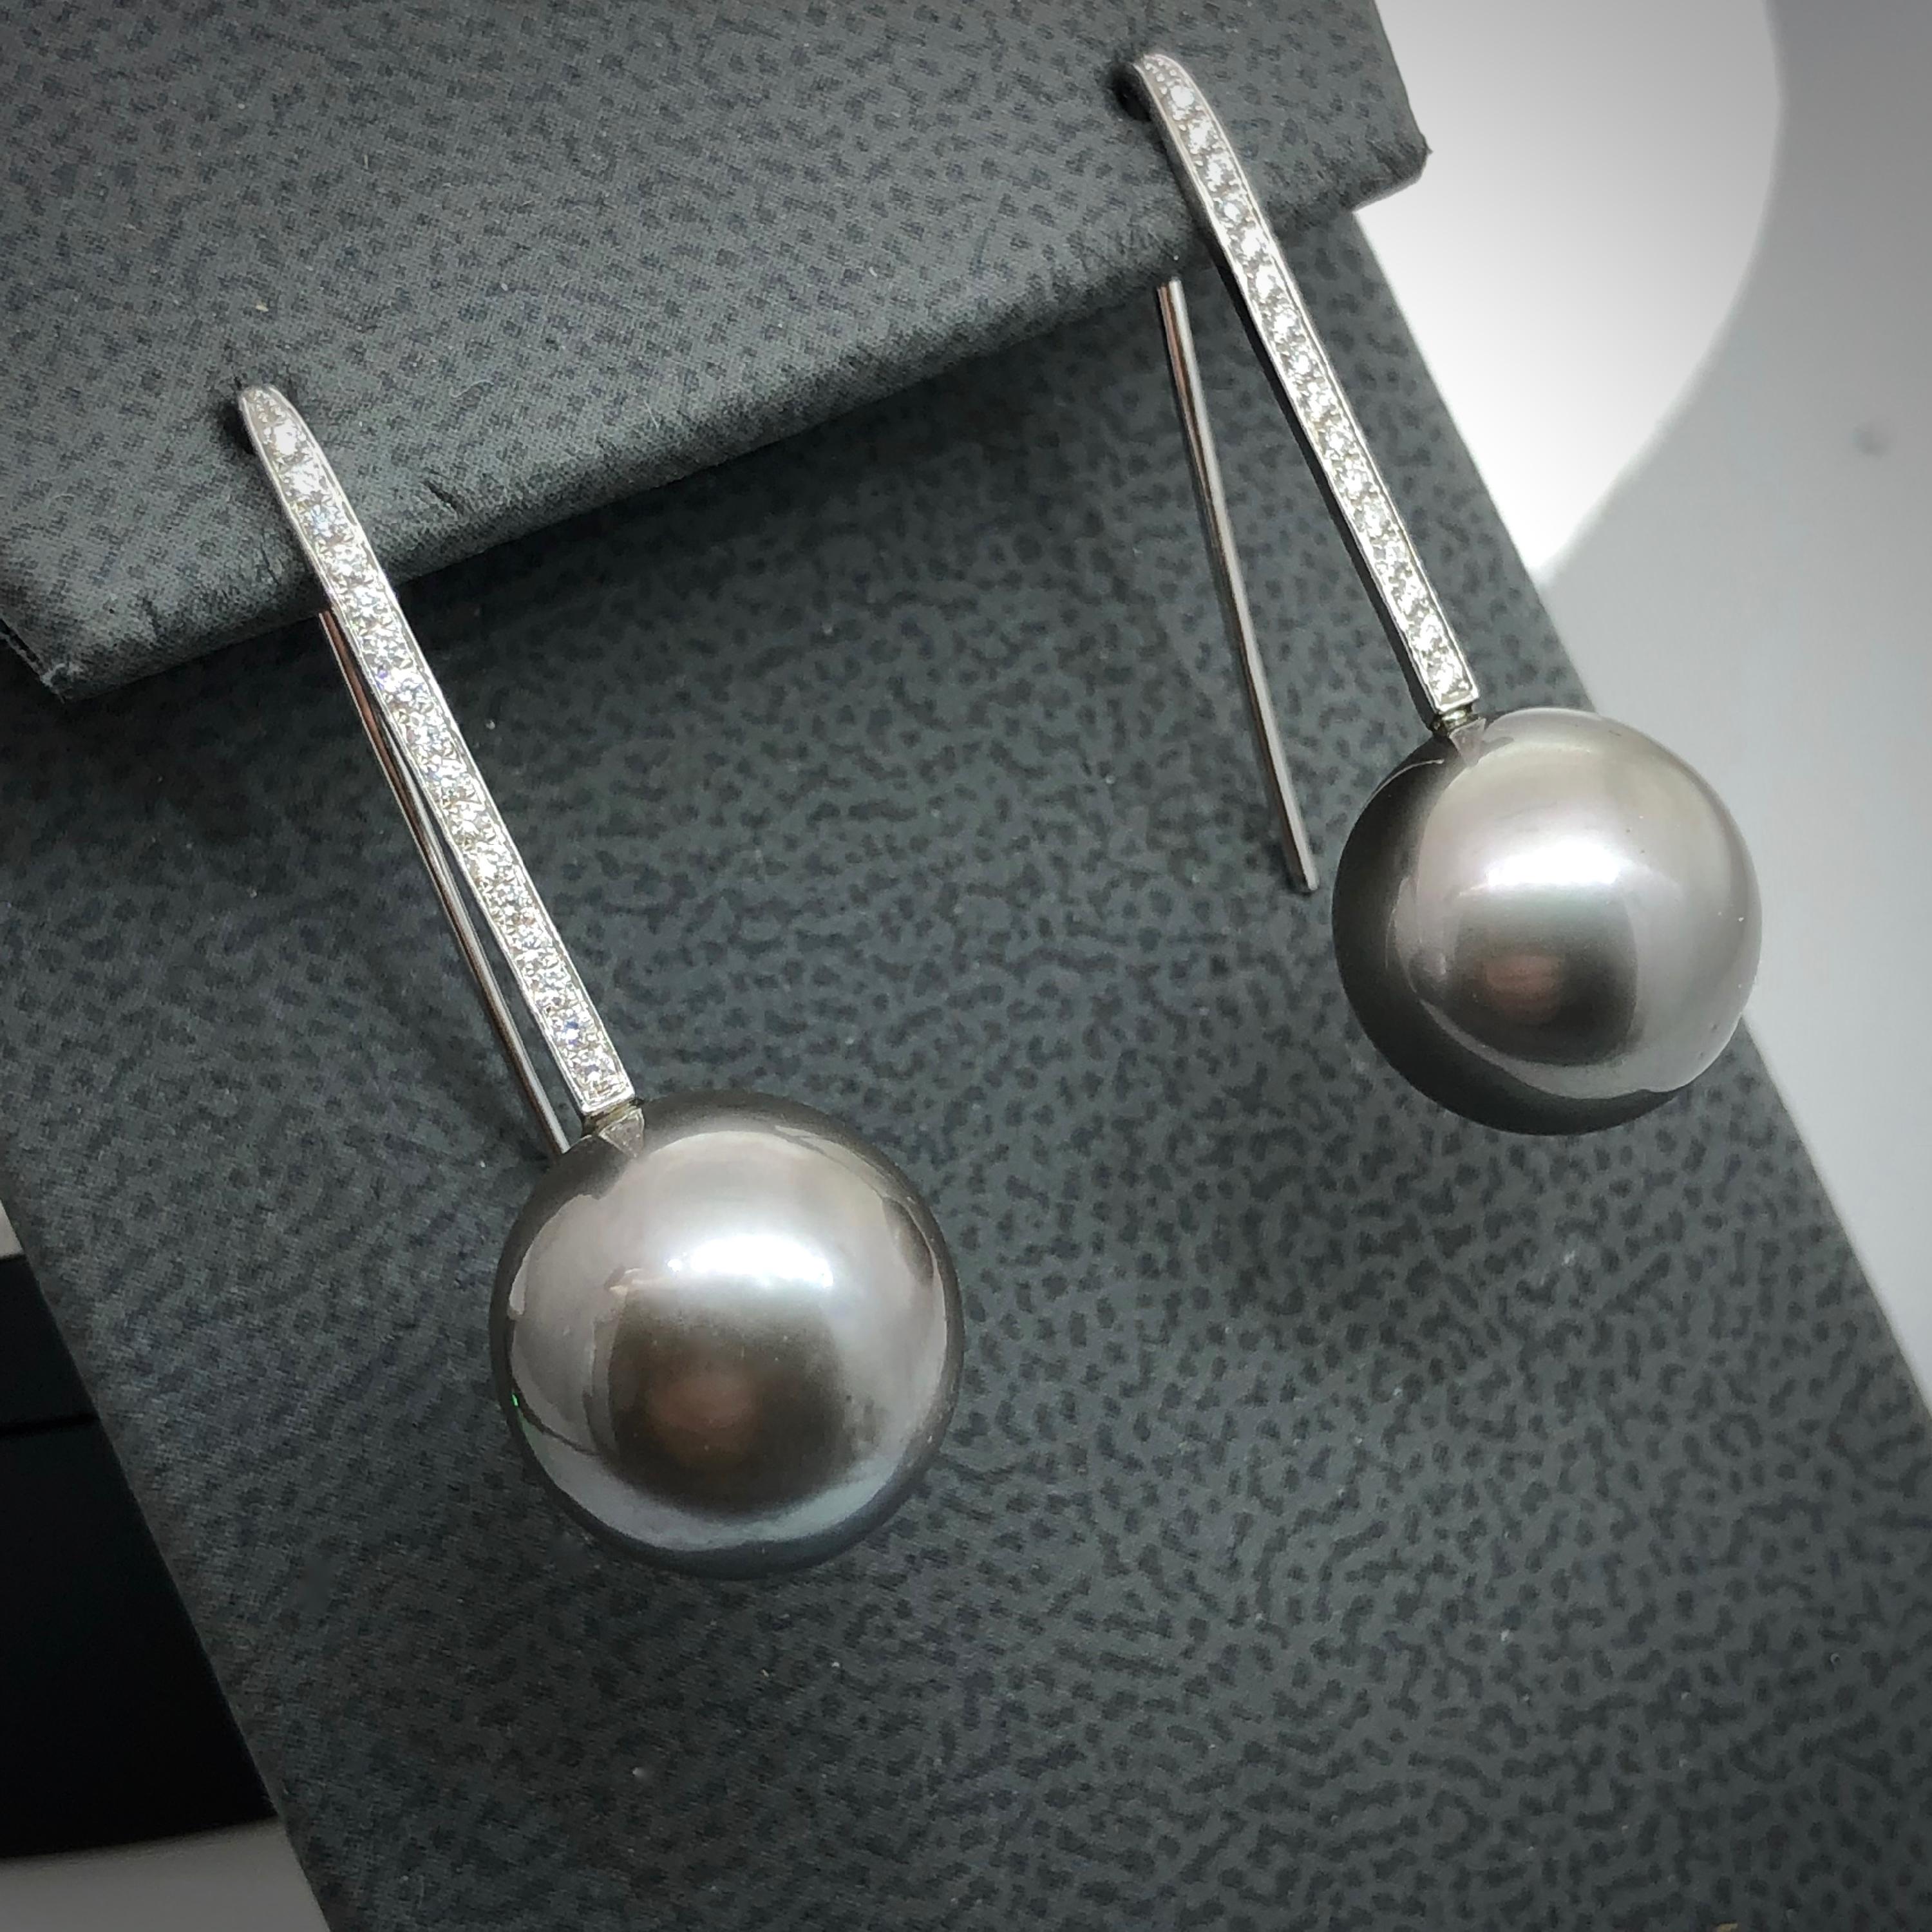 Brilliant Cut Hand Made Gold Hanging Earrings with Diamonds and Black Tahitian Pearls